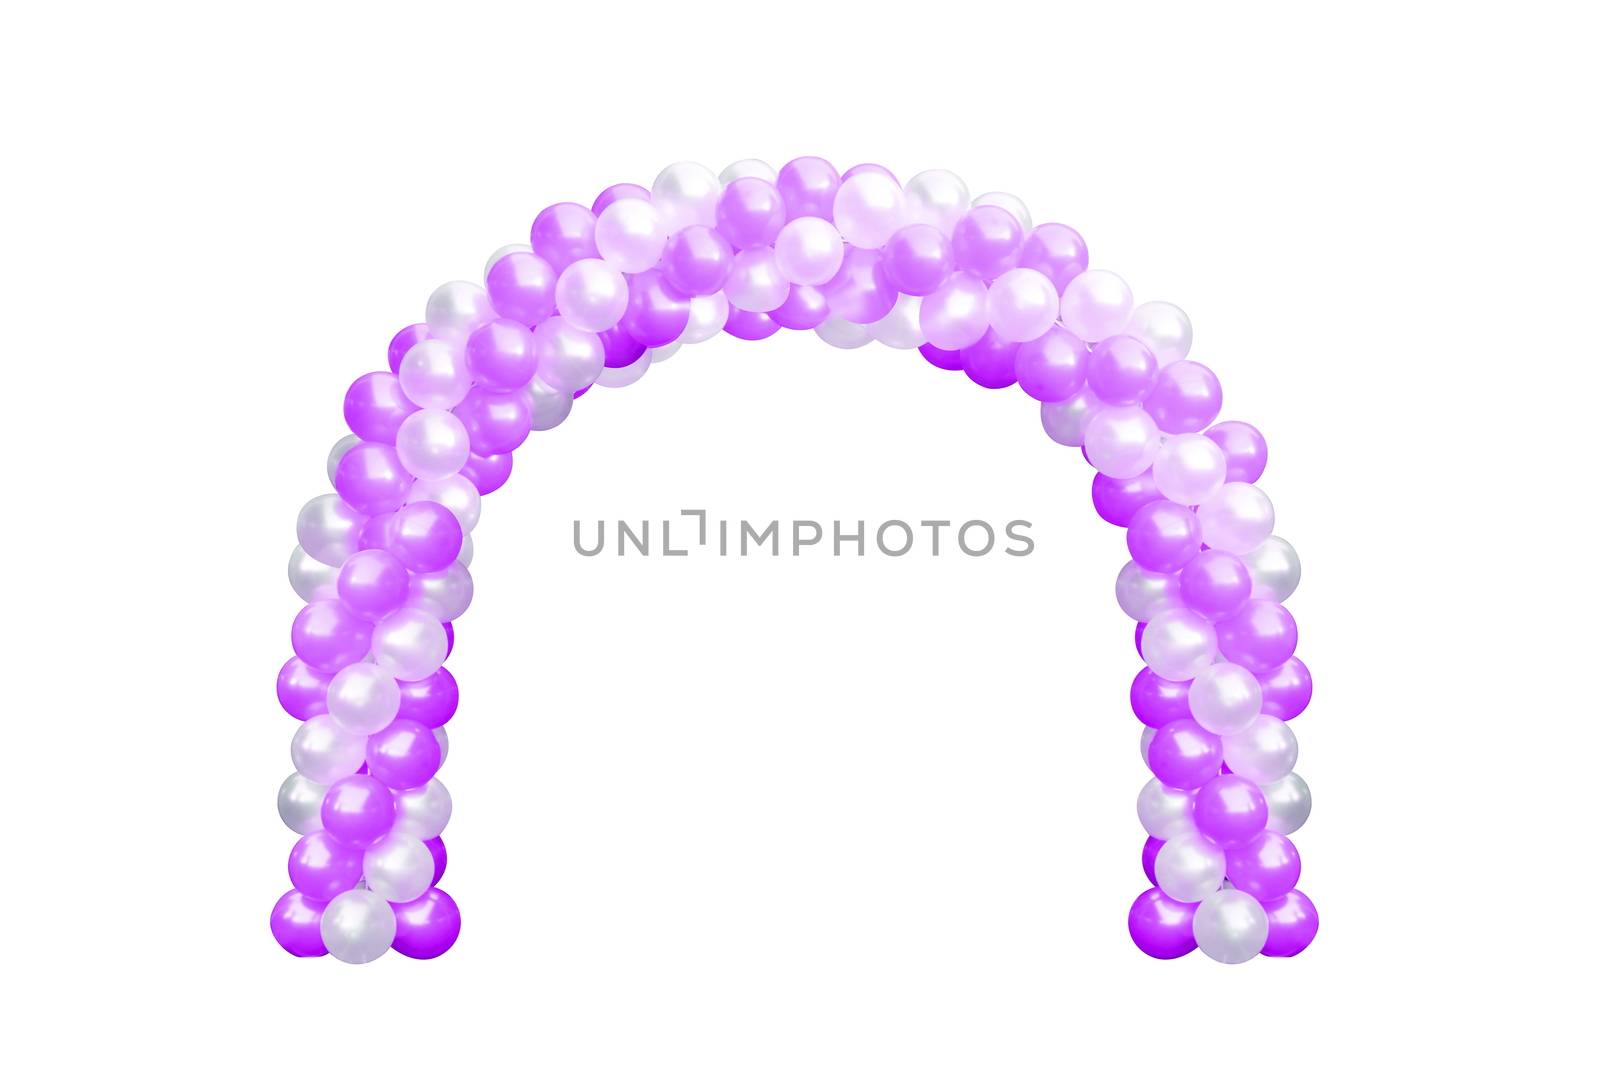 Balloon Archway door Purple Pink and white, Arches wedding, Balloon Festival design decoration elements with arch floral design isolated on white Background